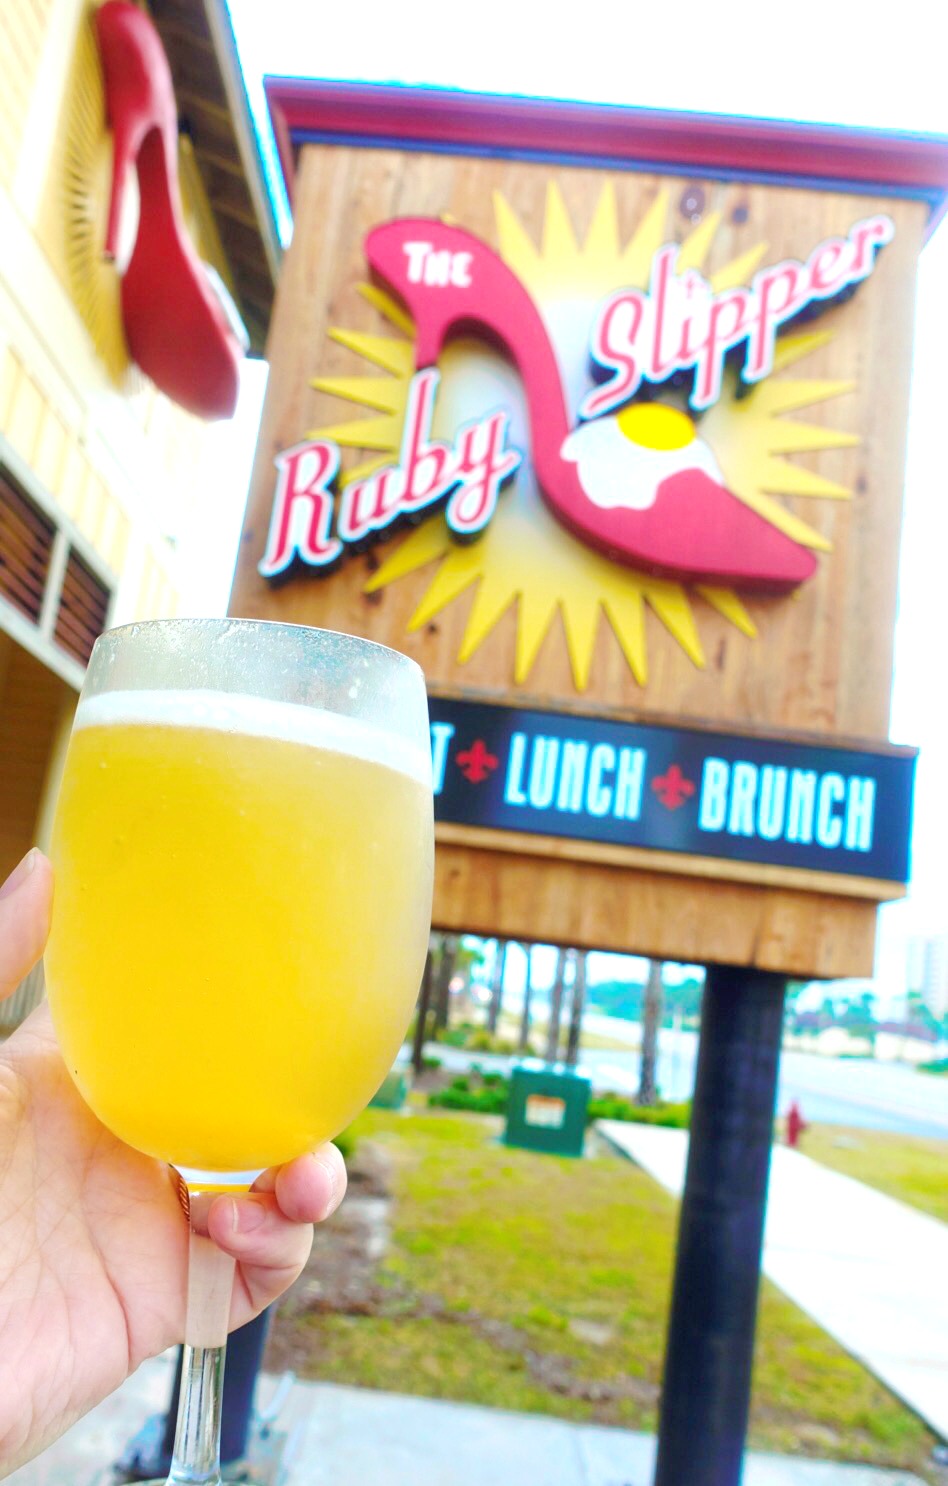 Where to eat brunch and lunch in Gulf Shores